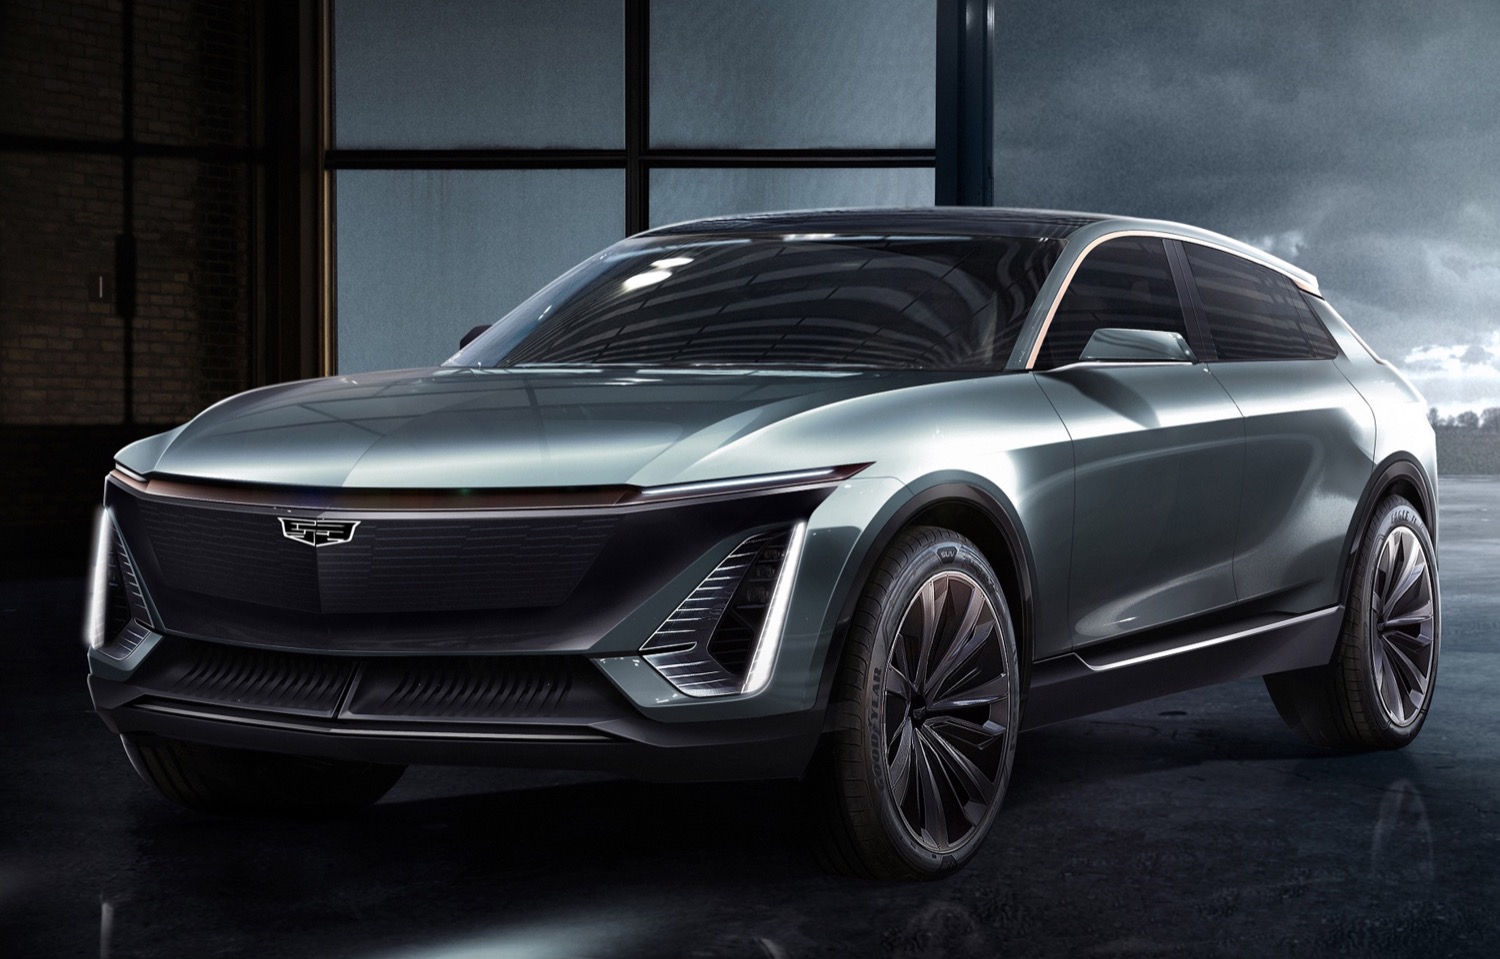 Next-Gen Cadillac XT5 To Lead Brand's Electric Vehicle Offensive